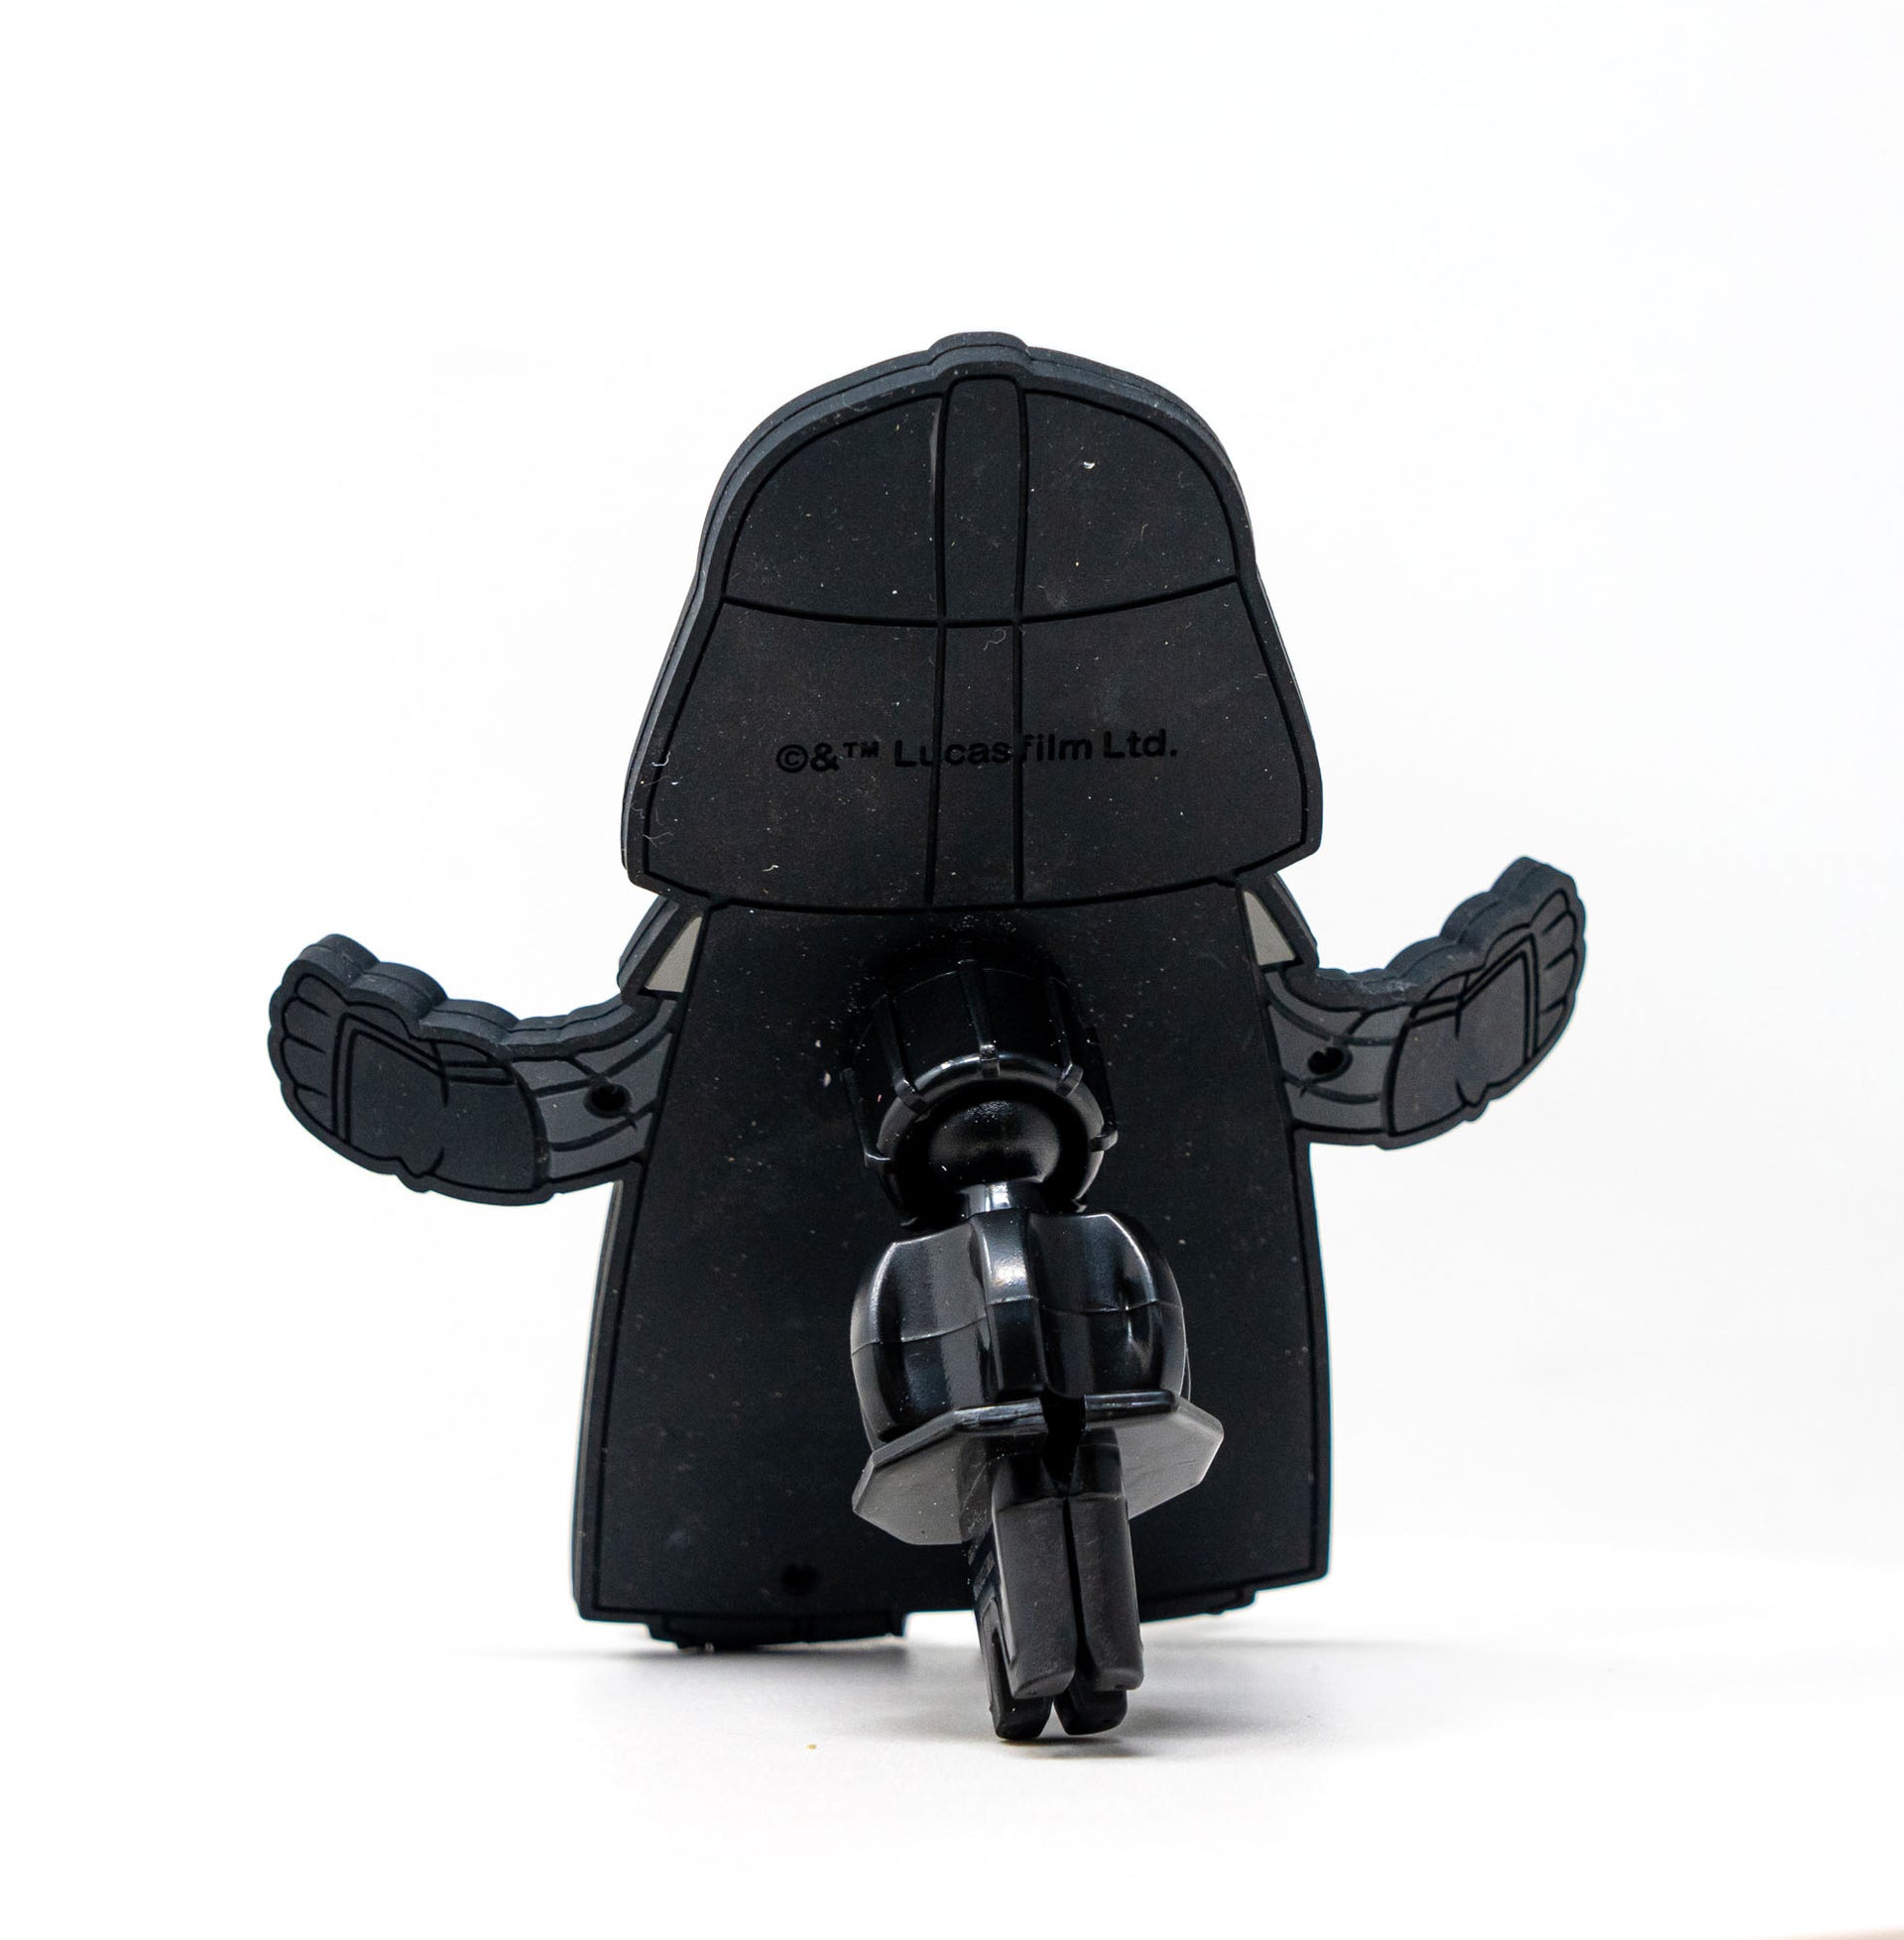 Image of Star Wars Darth Vader Hug Buddy resting on its vent clip rear view on a white background